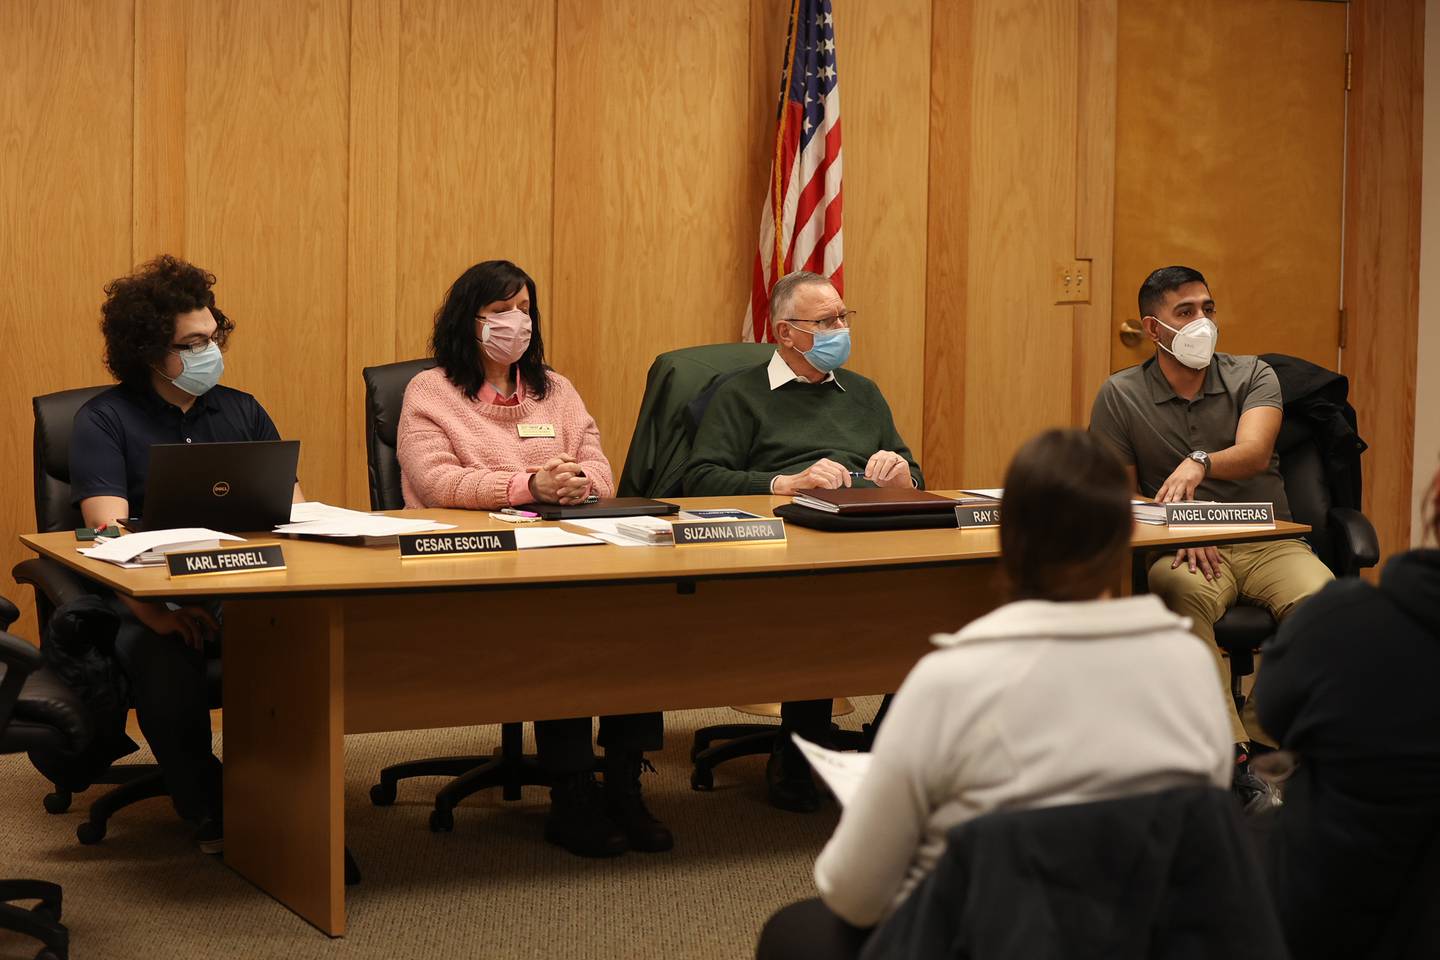 Board members Cesar Iscutia (left), Suzanna Ibarra, Ray Slattery and Angel Contreras during the Joliet Township regular board meeting. Tuesday, Feb. 8, 2022, in Joliet.